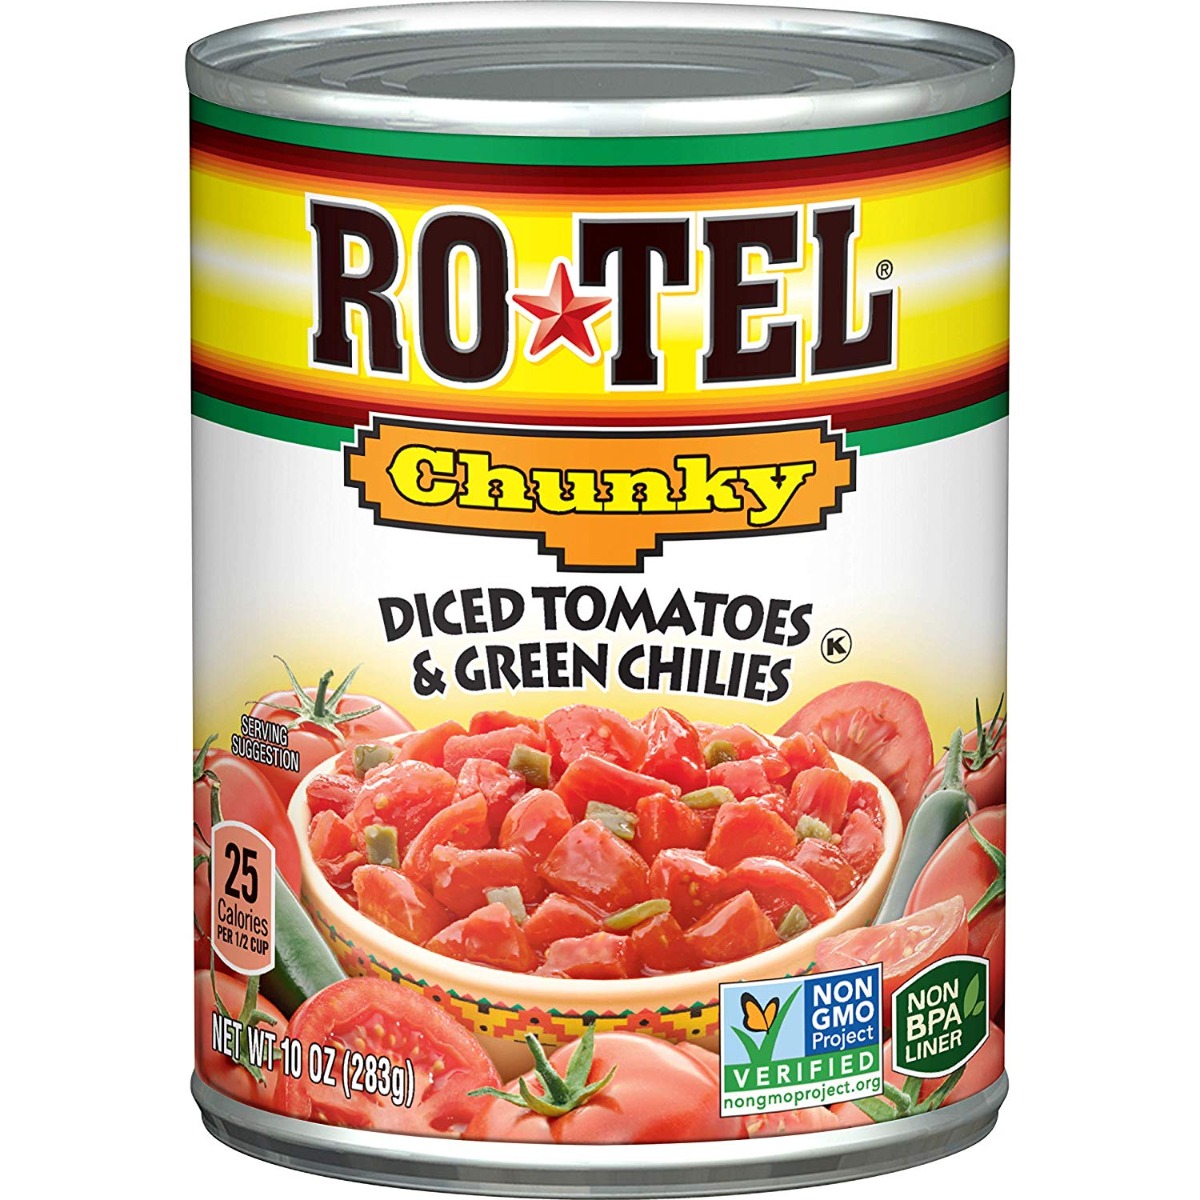 RO TEL: Chunky Diced Tomatoes and Green Chilies, 10 oz - 0064144282418